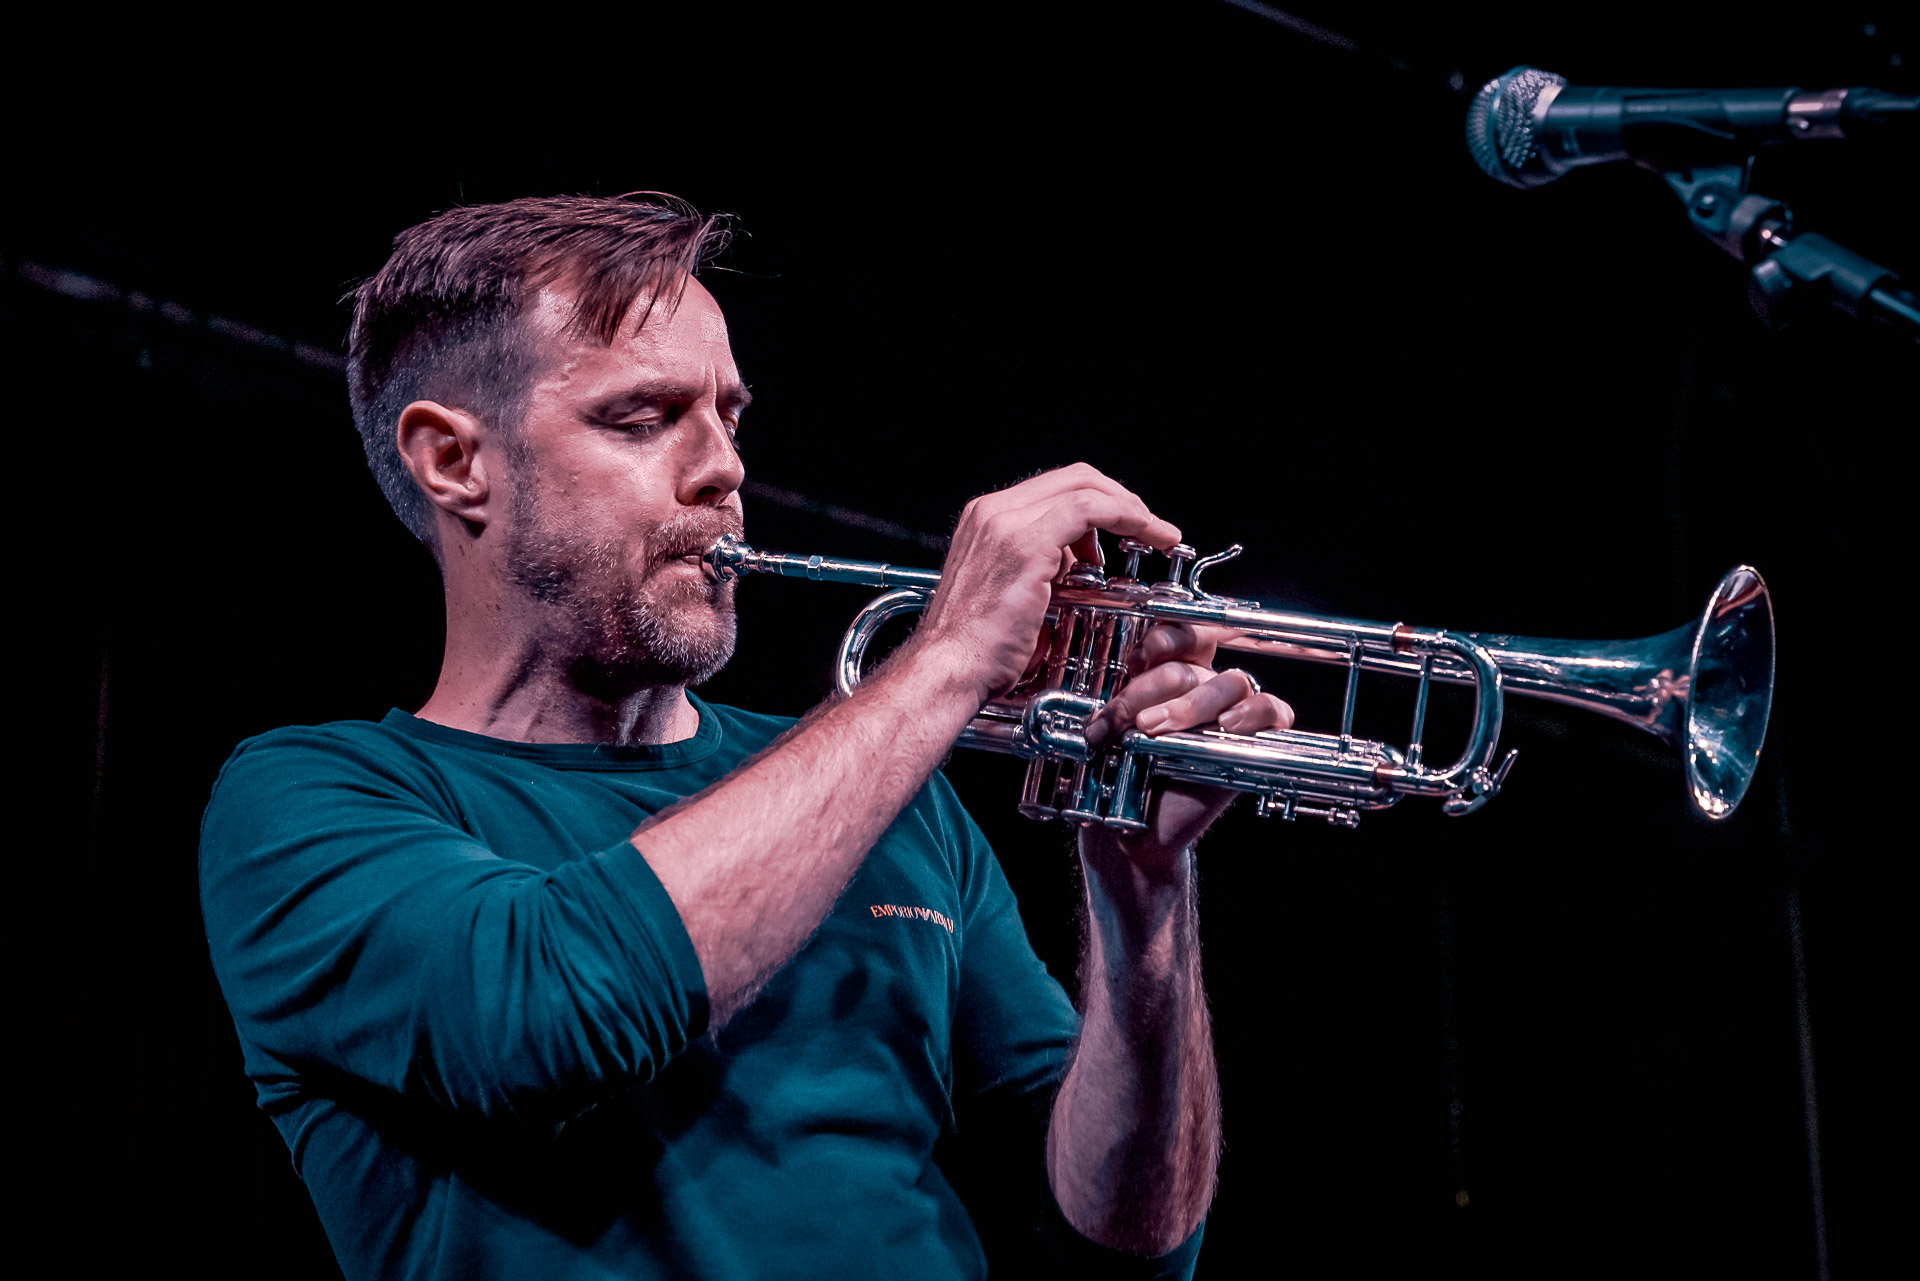 A man playing trumpet on stage